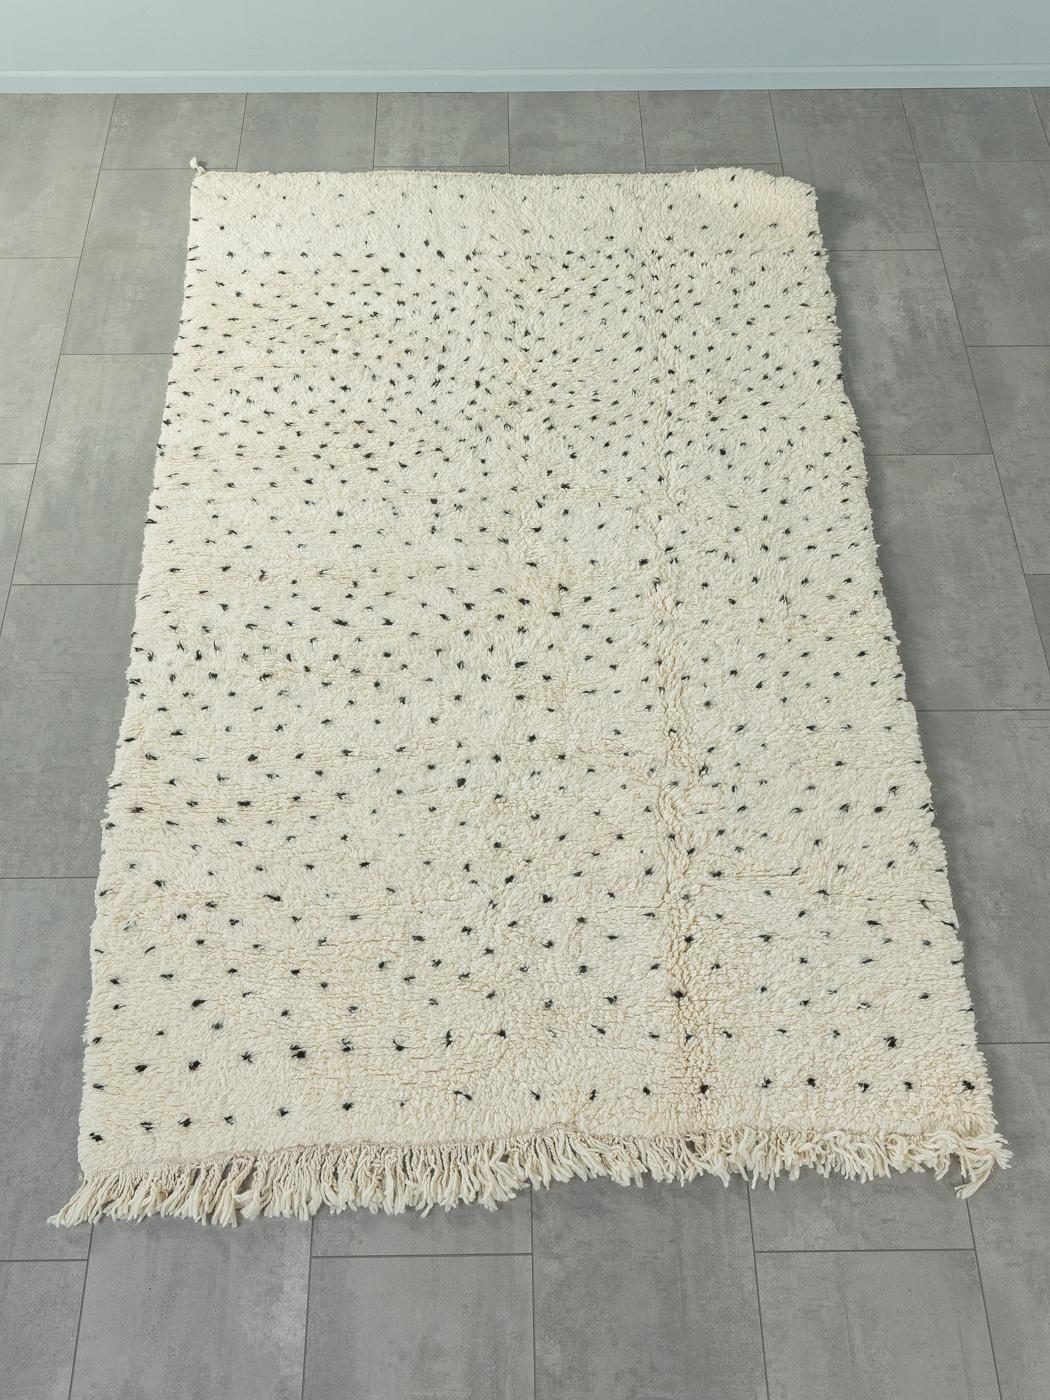 Tiny Dalmatian is a contemporary 100% wool rug – thick and soft, comfortable underfoot. Our Berber rugs are handwoven and handknotted by Amazigh women in the Atlas Mountains. These communities have been crafting rugs for thousands of years. One knot